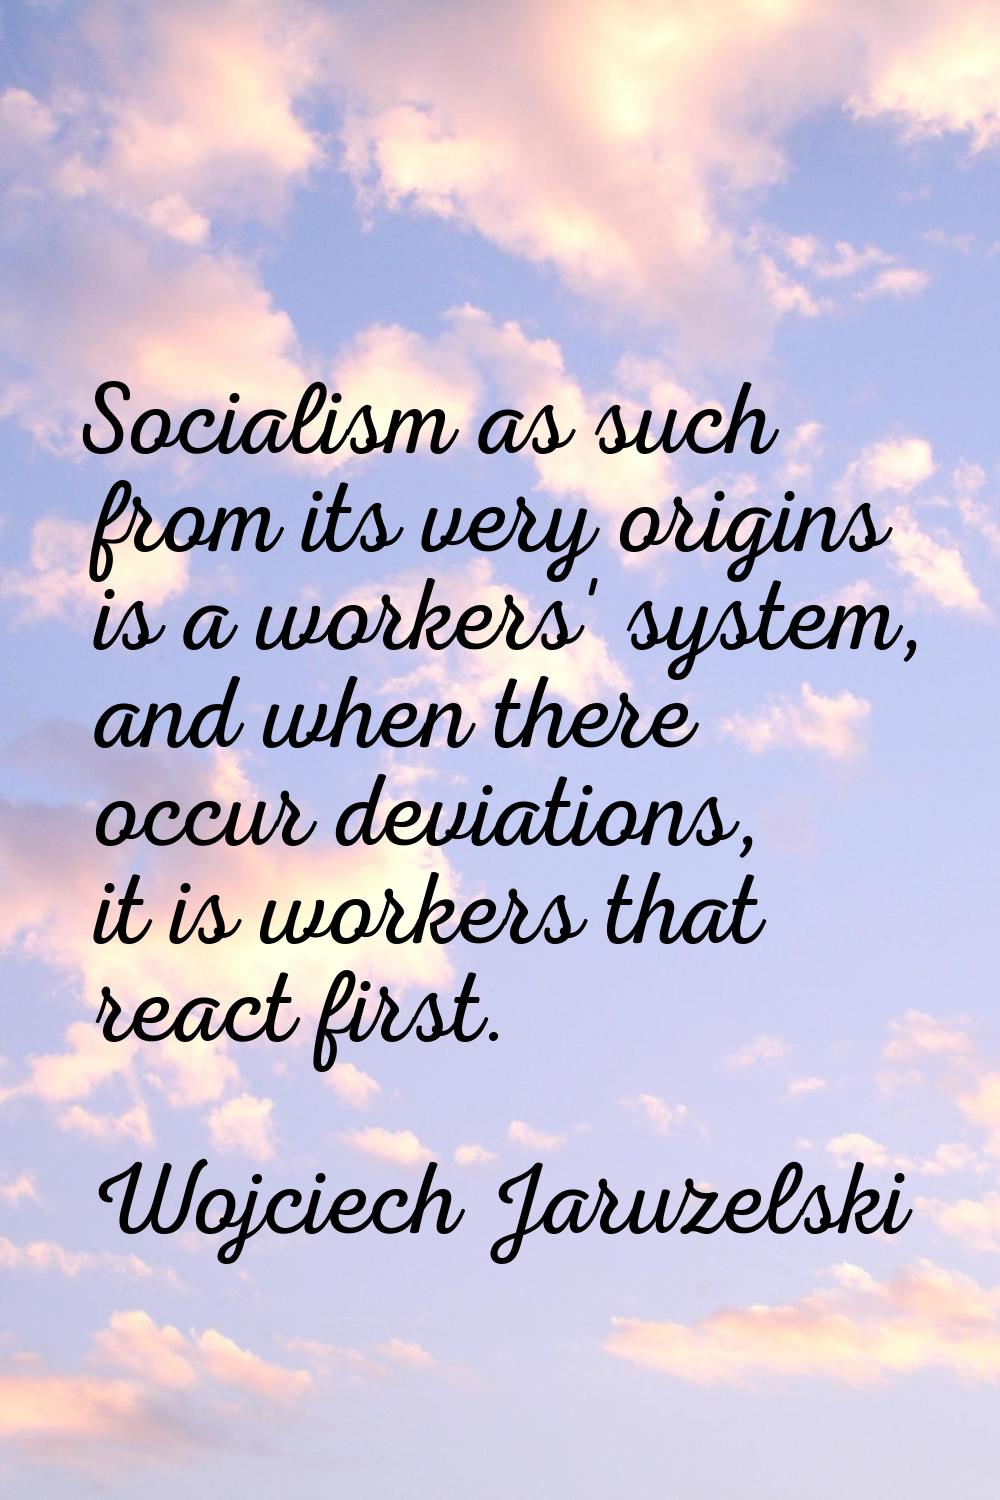 Socialism as such from its very origins is a workers' system, and when there occur deviations, it i